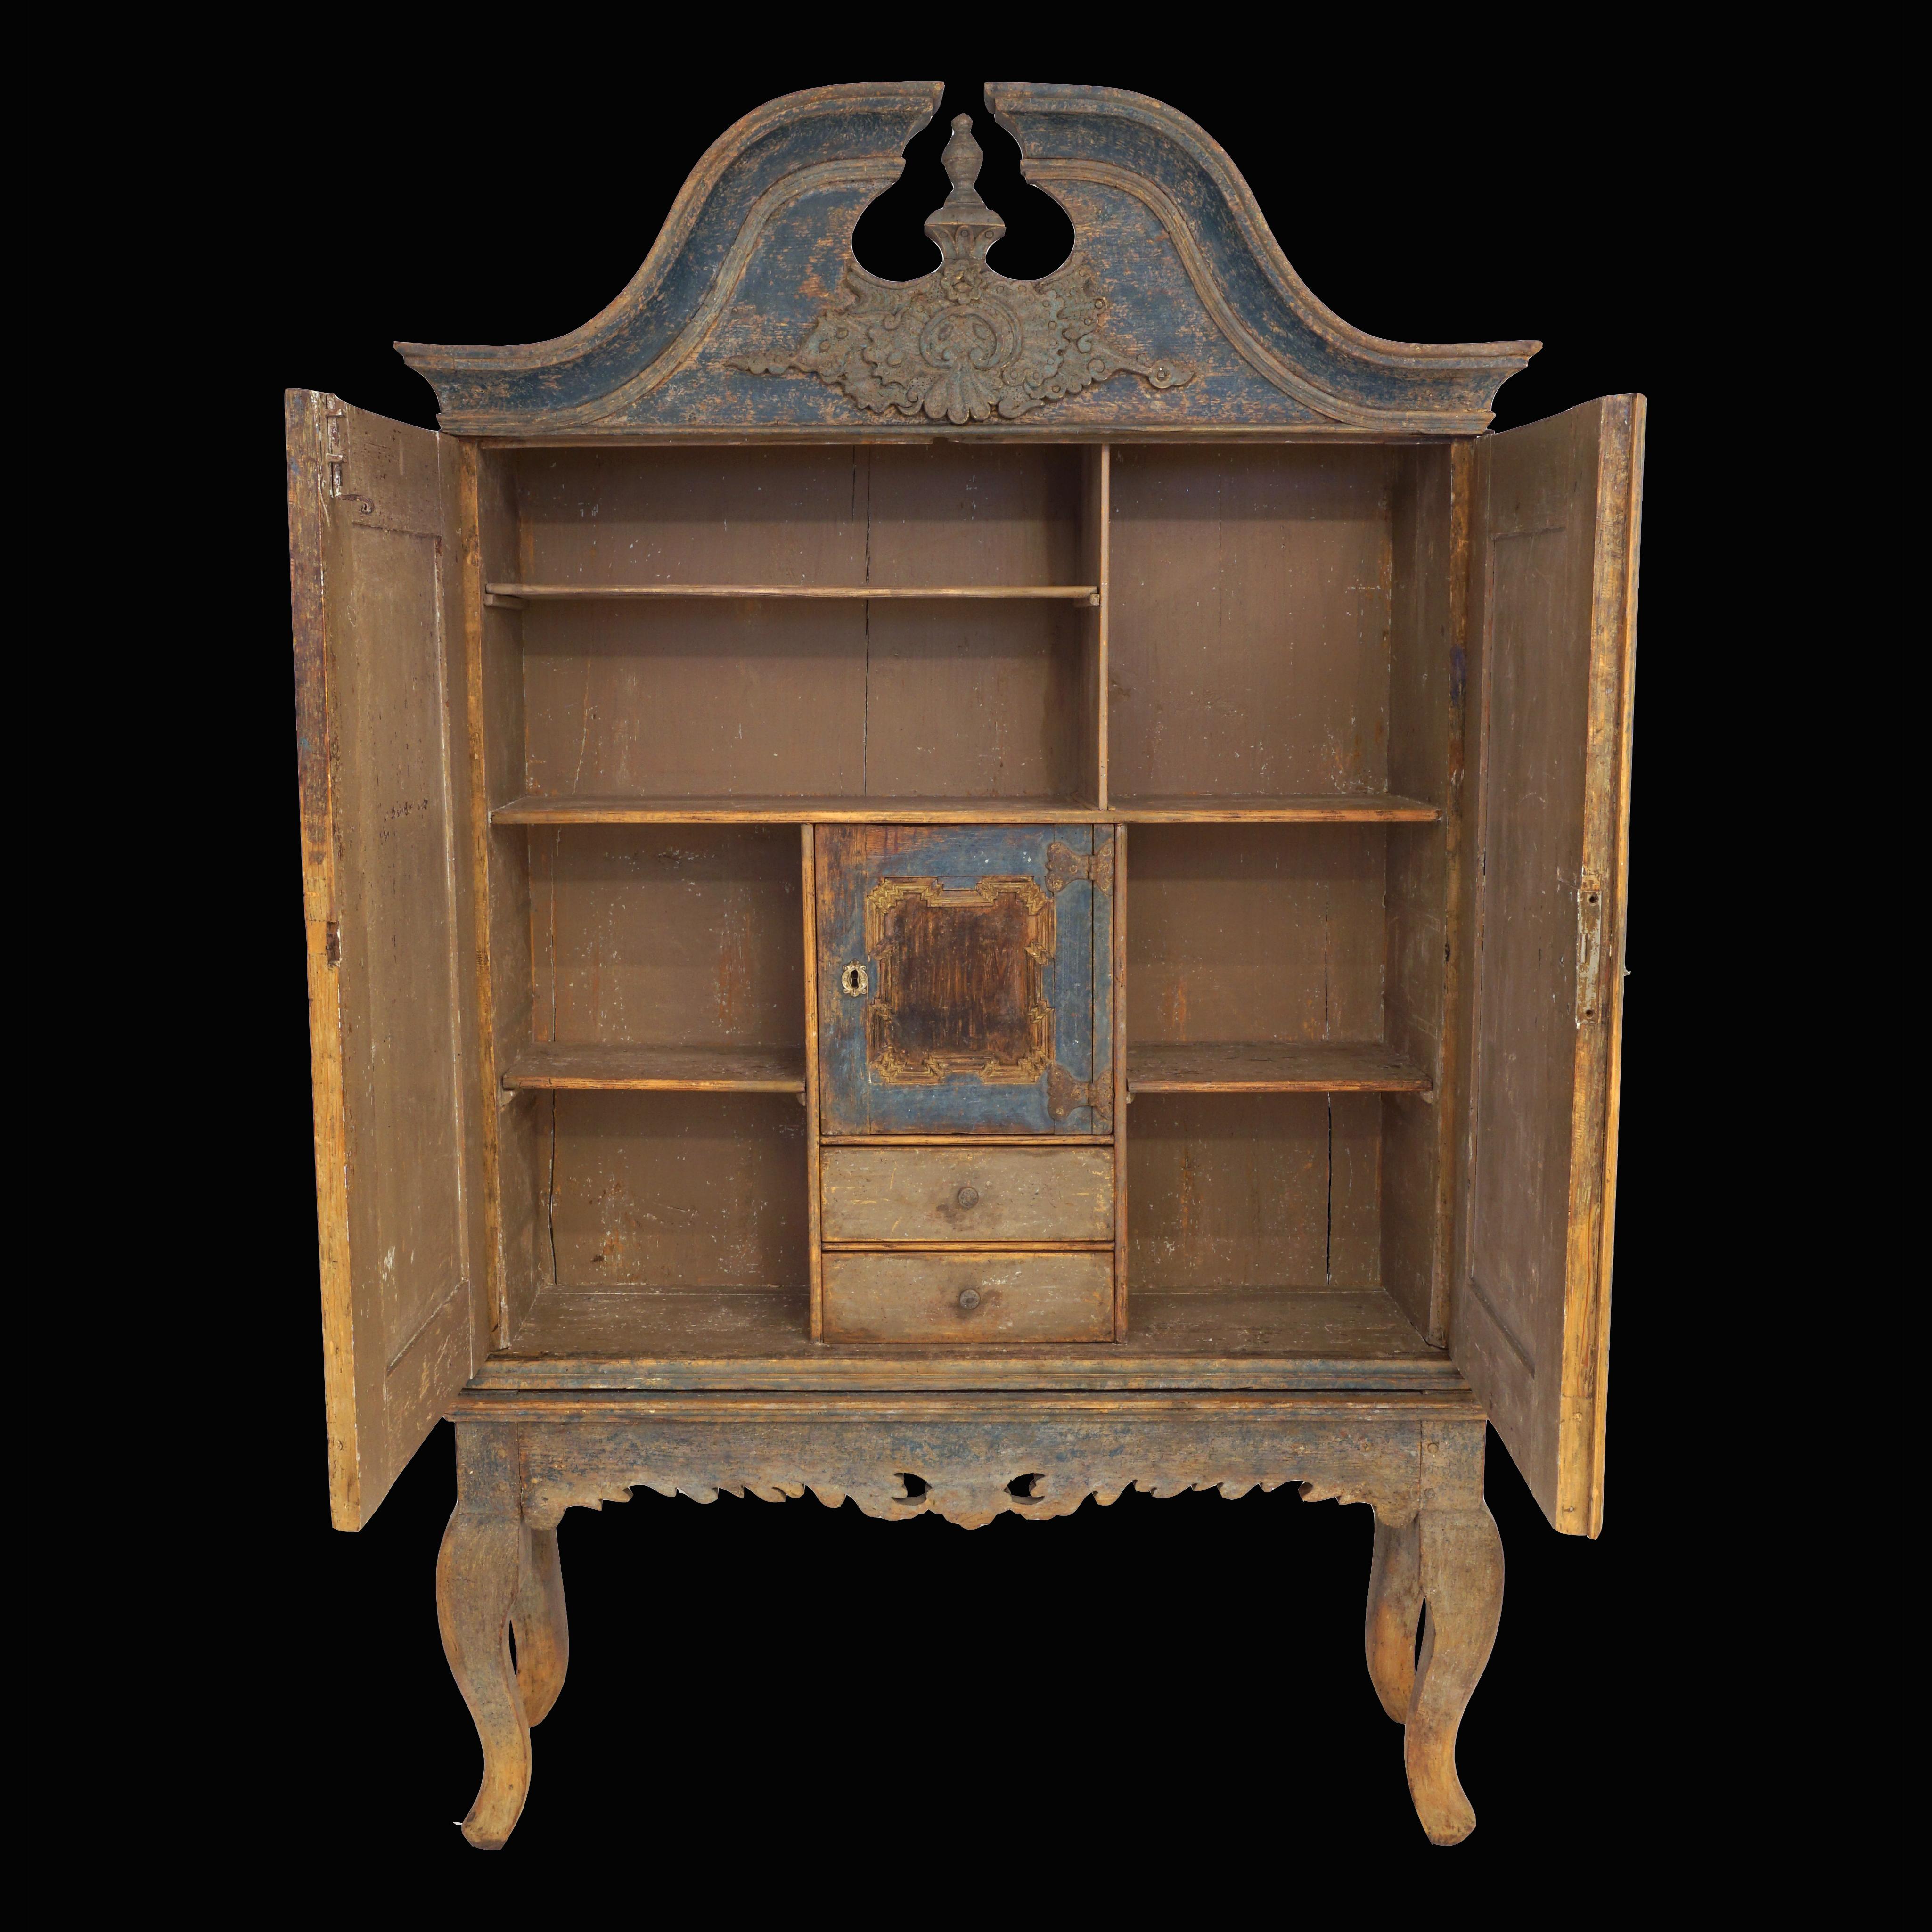 Original decorated mid 18th century Swedish Baroque cabinet. 
A very charming and original piece of furniture with a secret storage room.